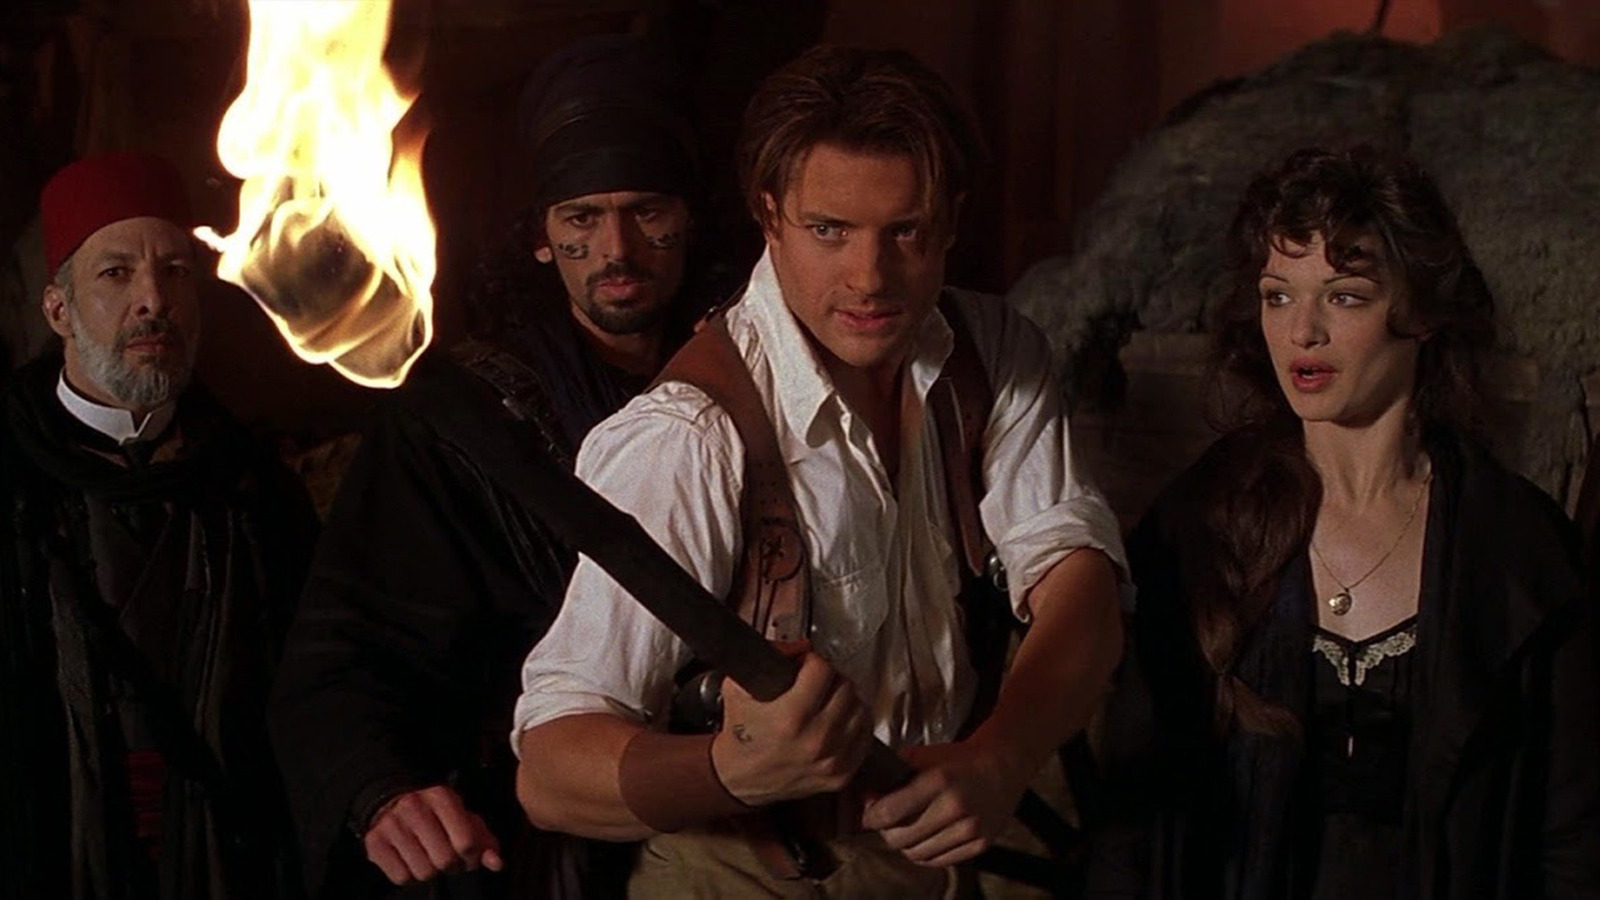 Wrap Yourself In These Facts About 1999's The Mummy